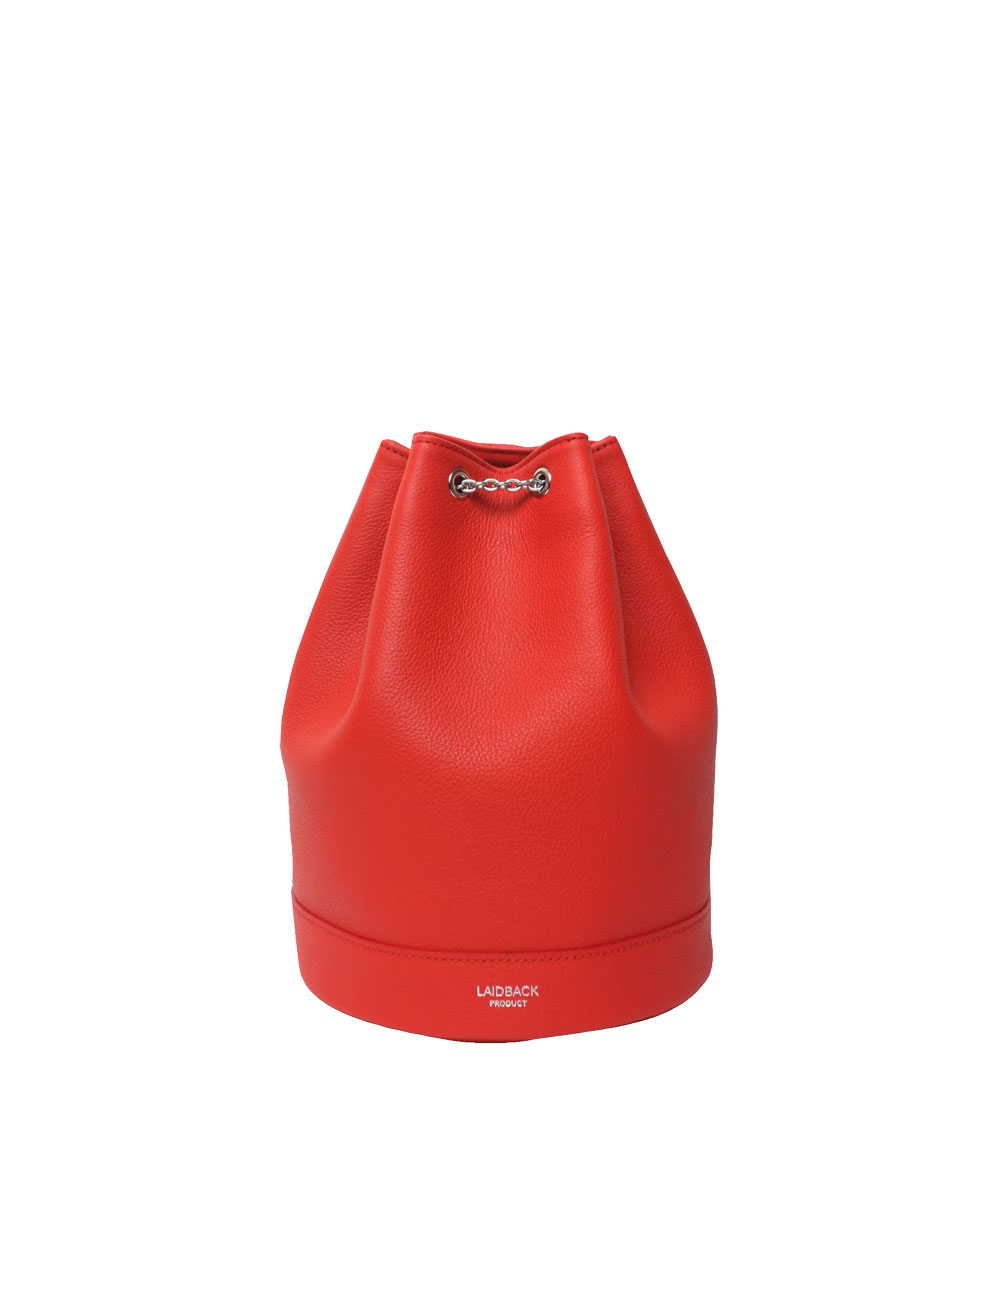 Sand chain bag / red